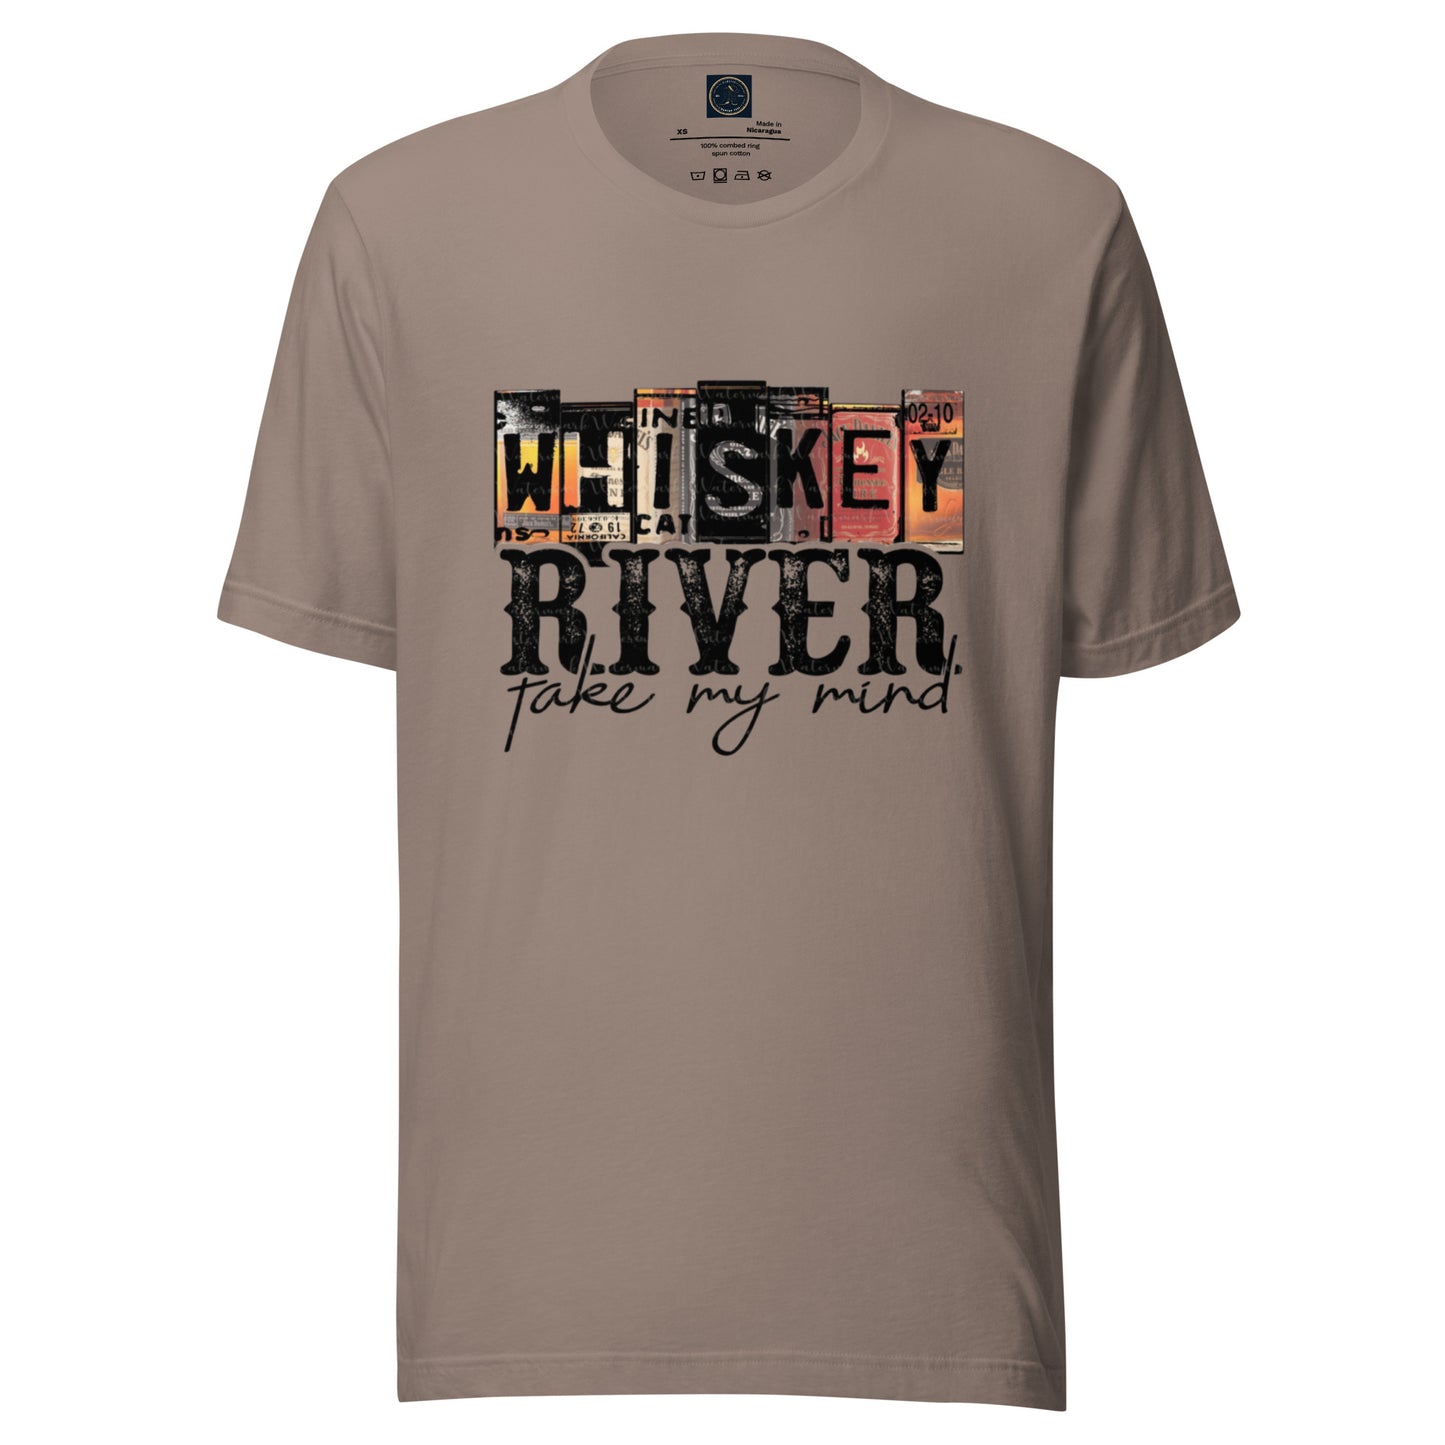 Whiskey River - Classic Country Tees